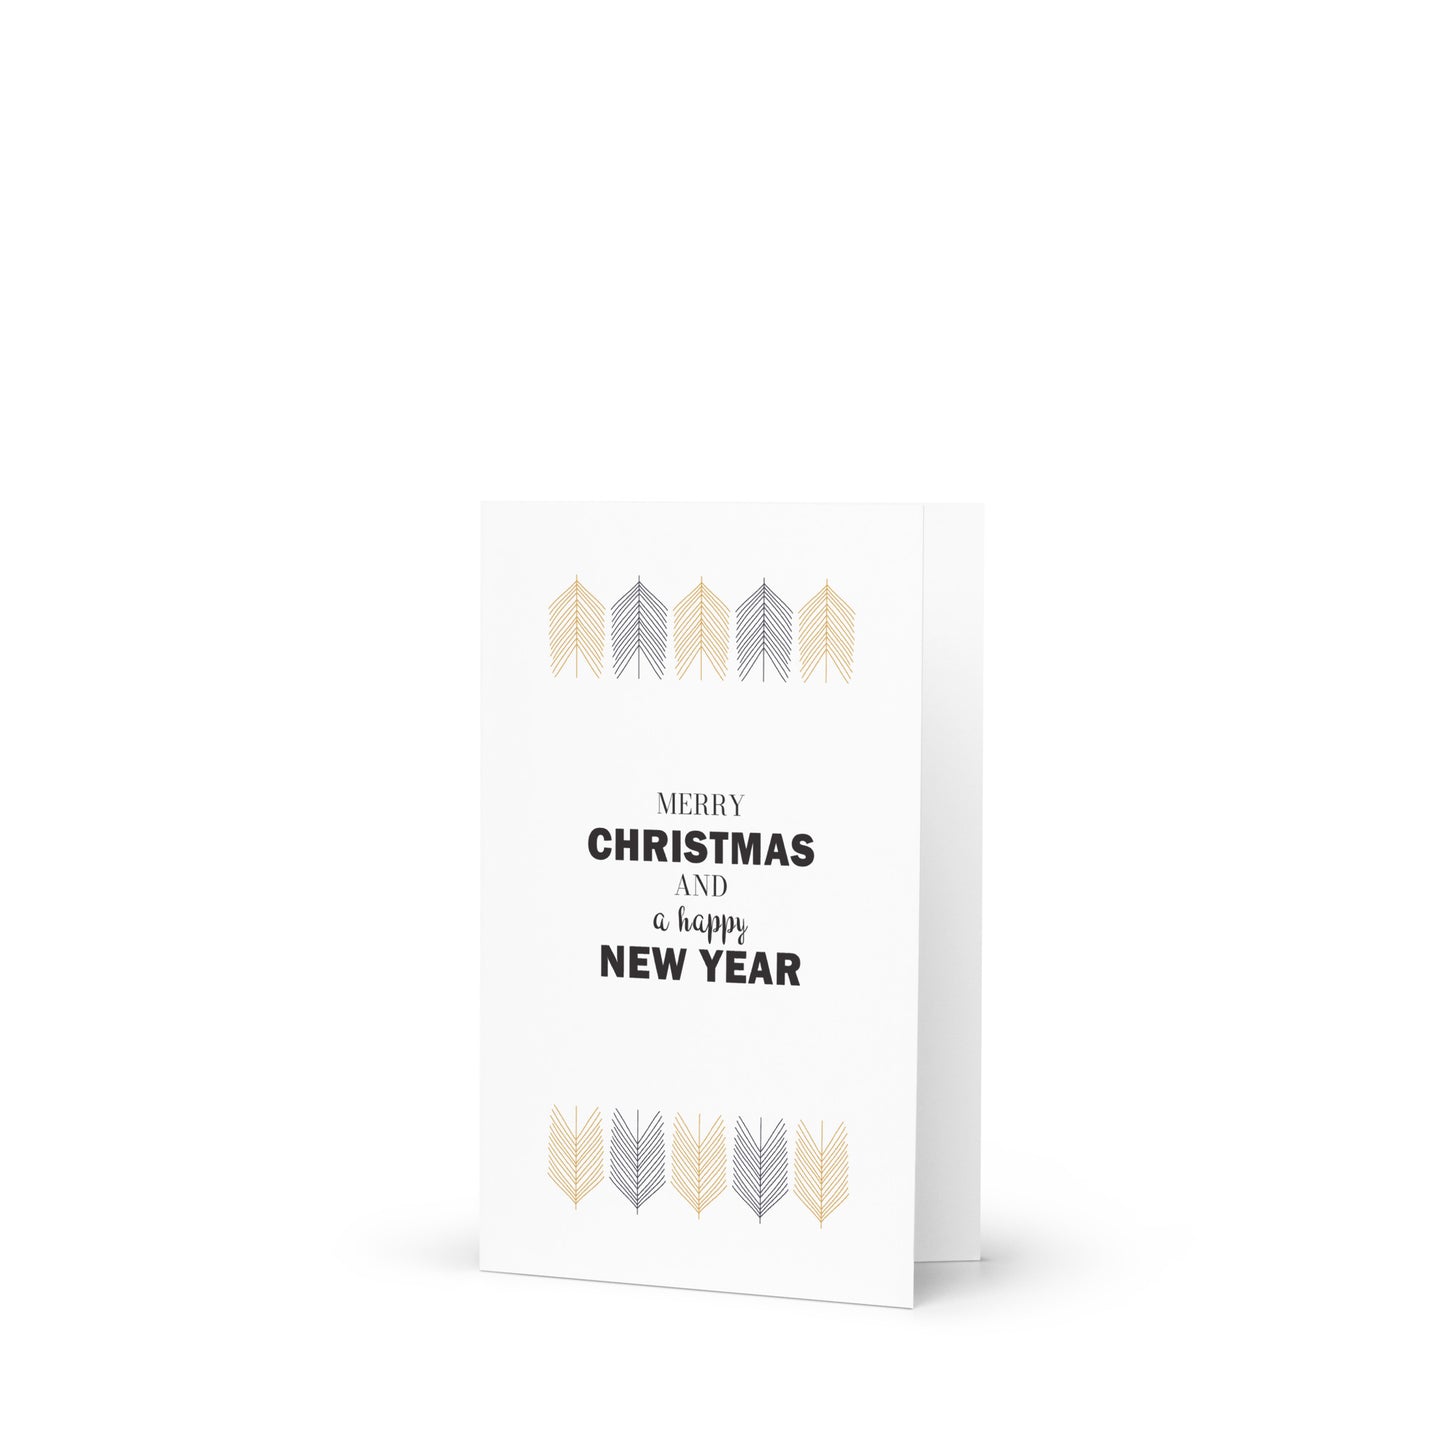 Merry Christmas & a Happy New Year - Elegant Greeting card for Stylish Wishing